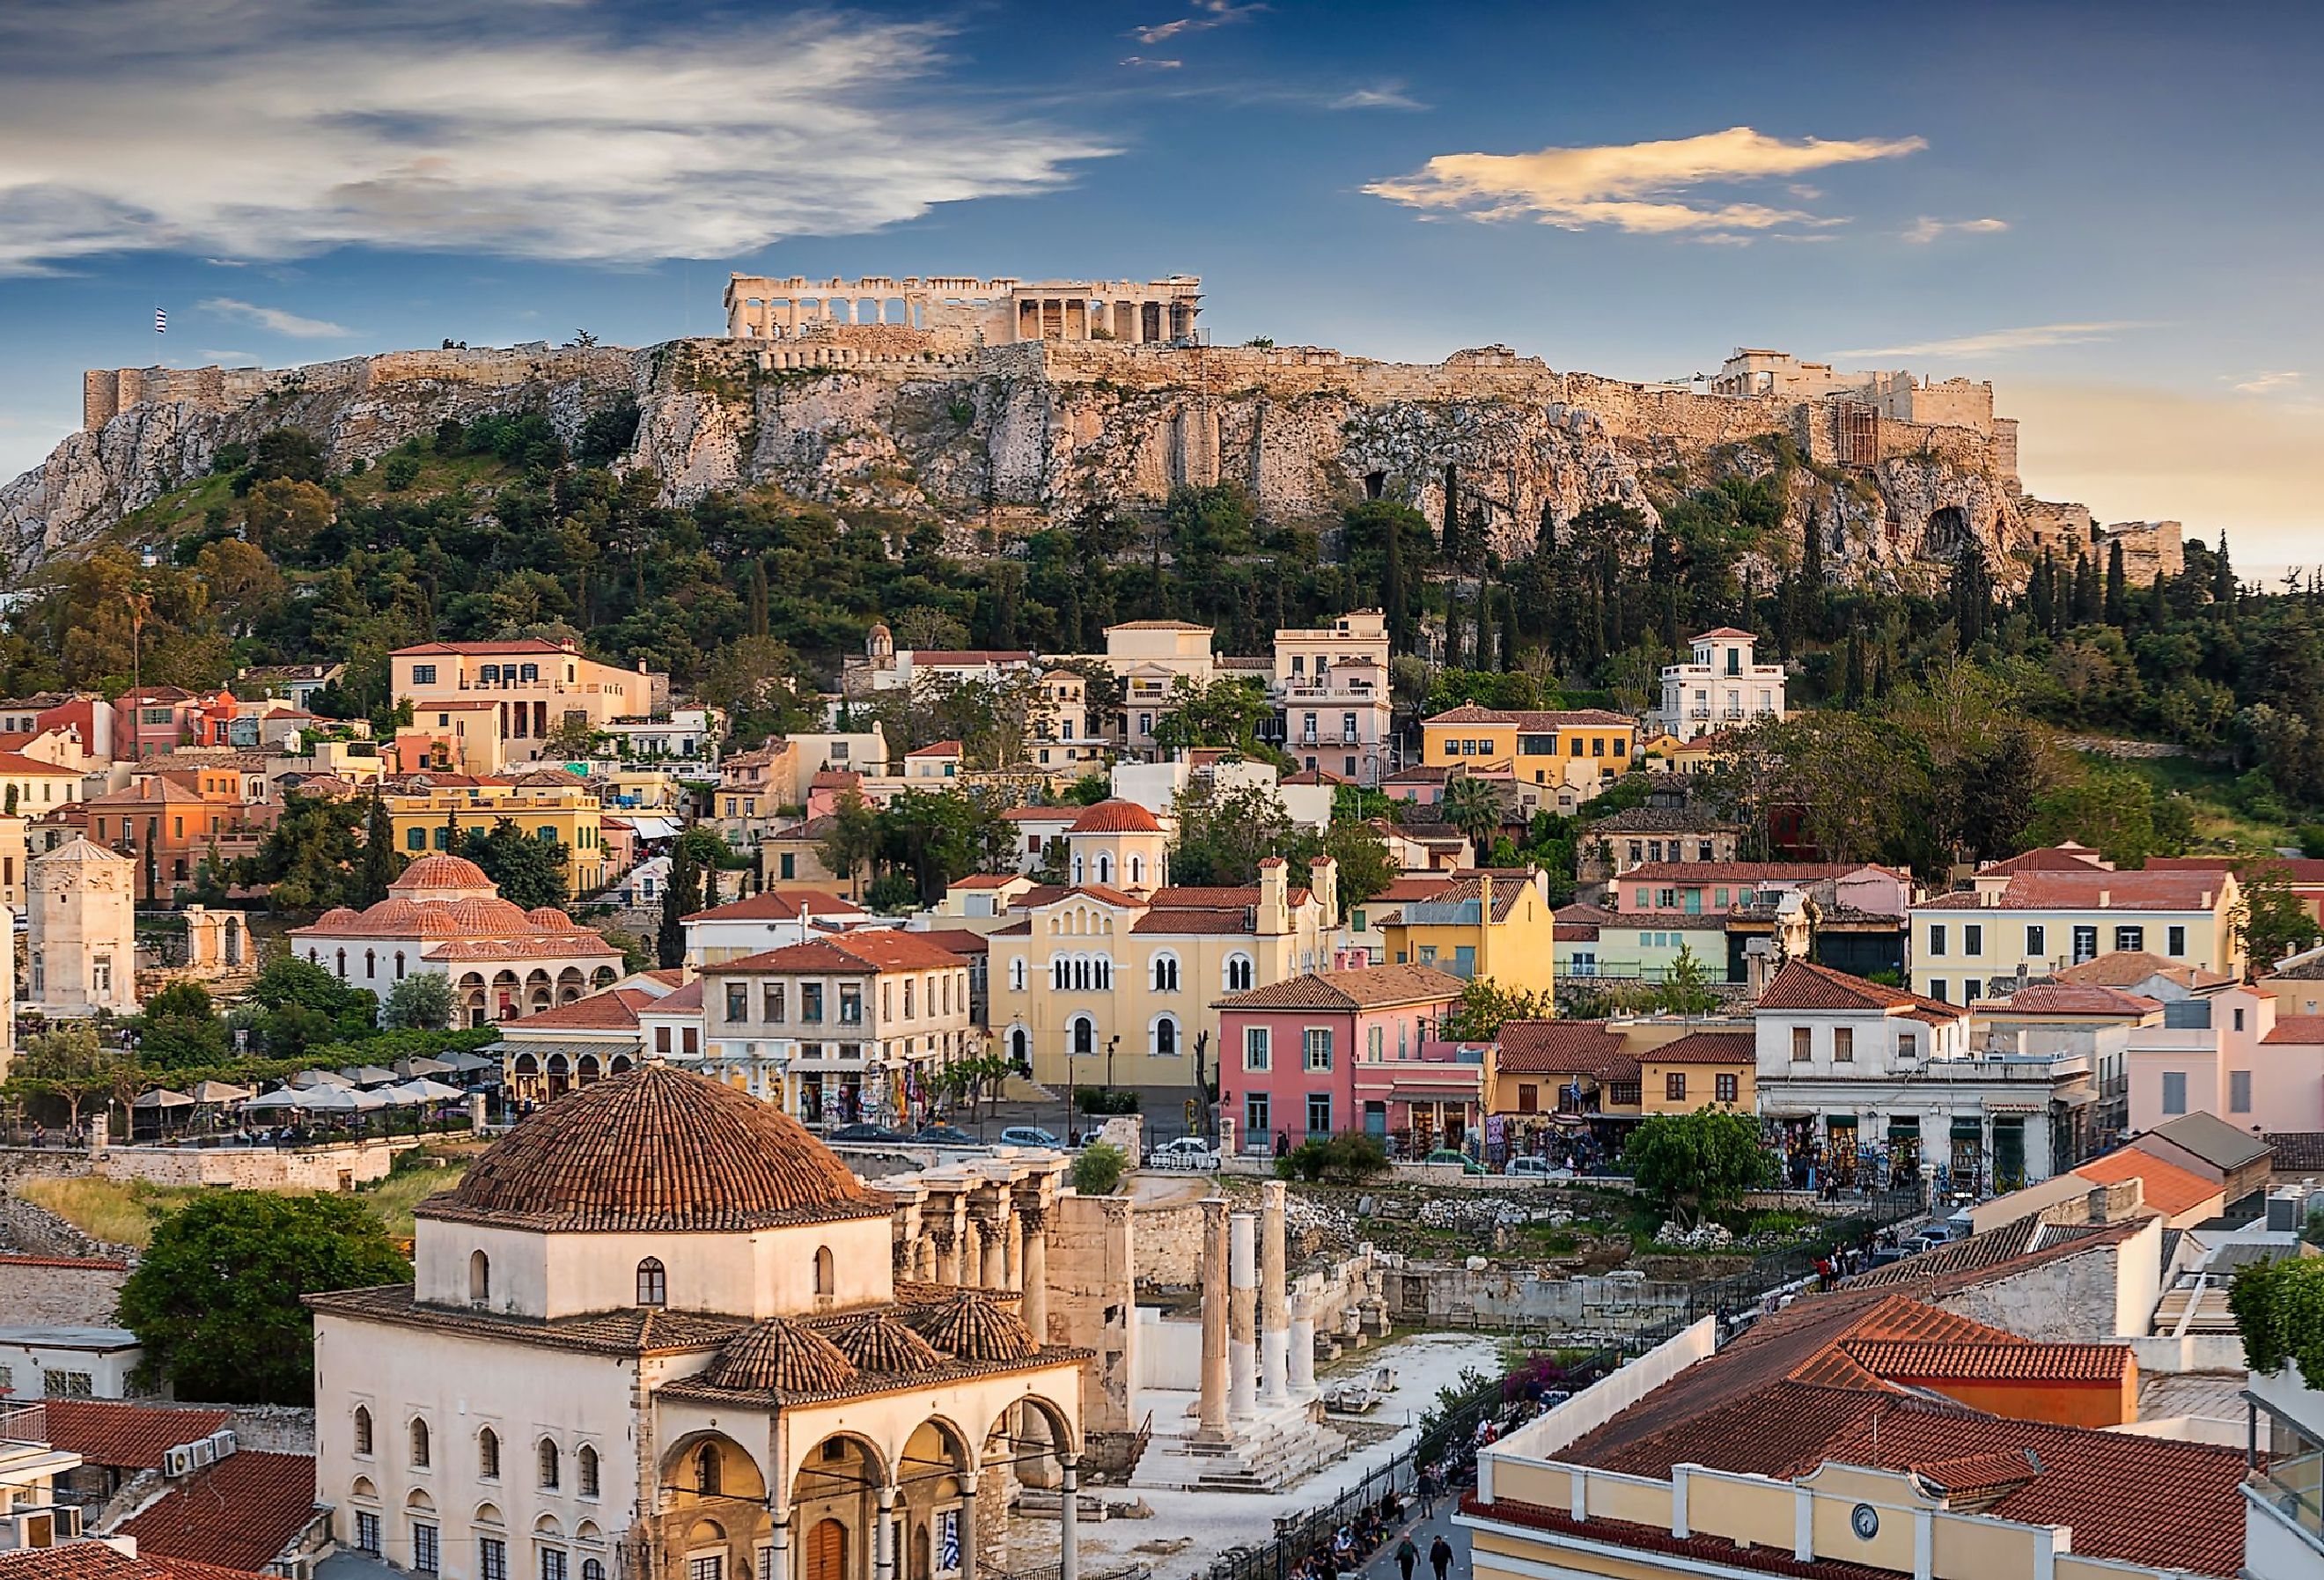 Old town of Athens and the Parthenon Temple of the Acropolis. Image credit: Sven Hansche via shutterstock